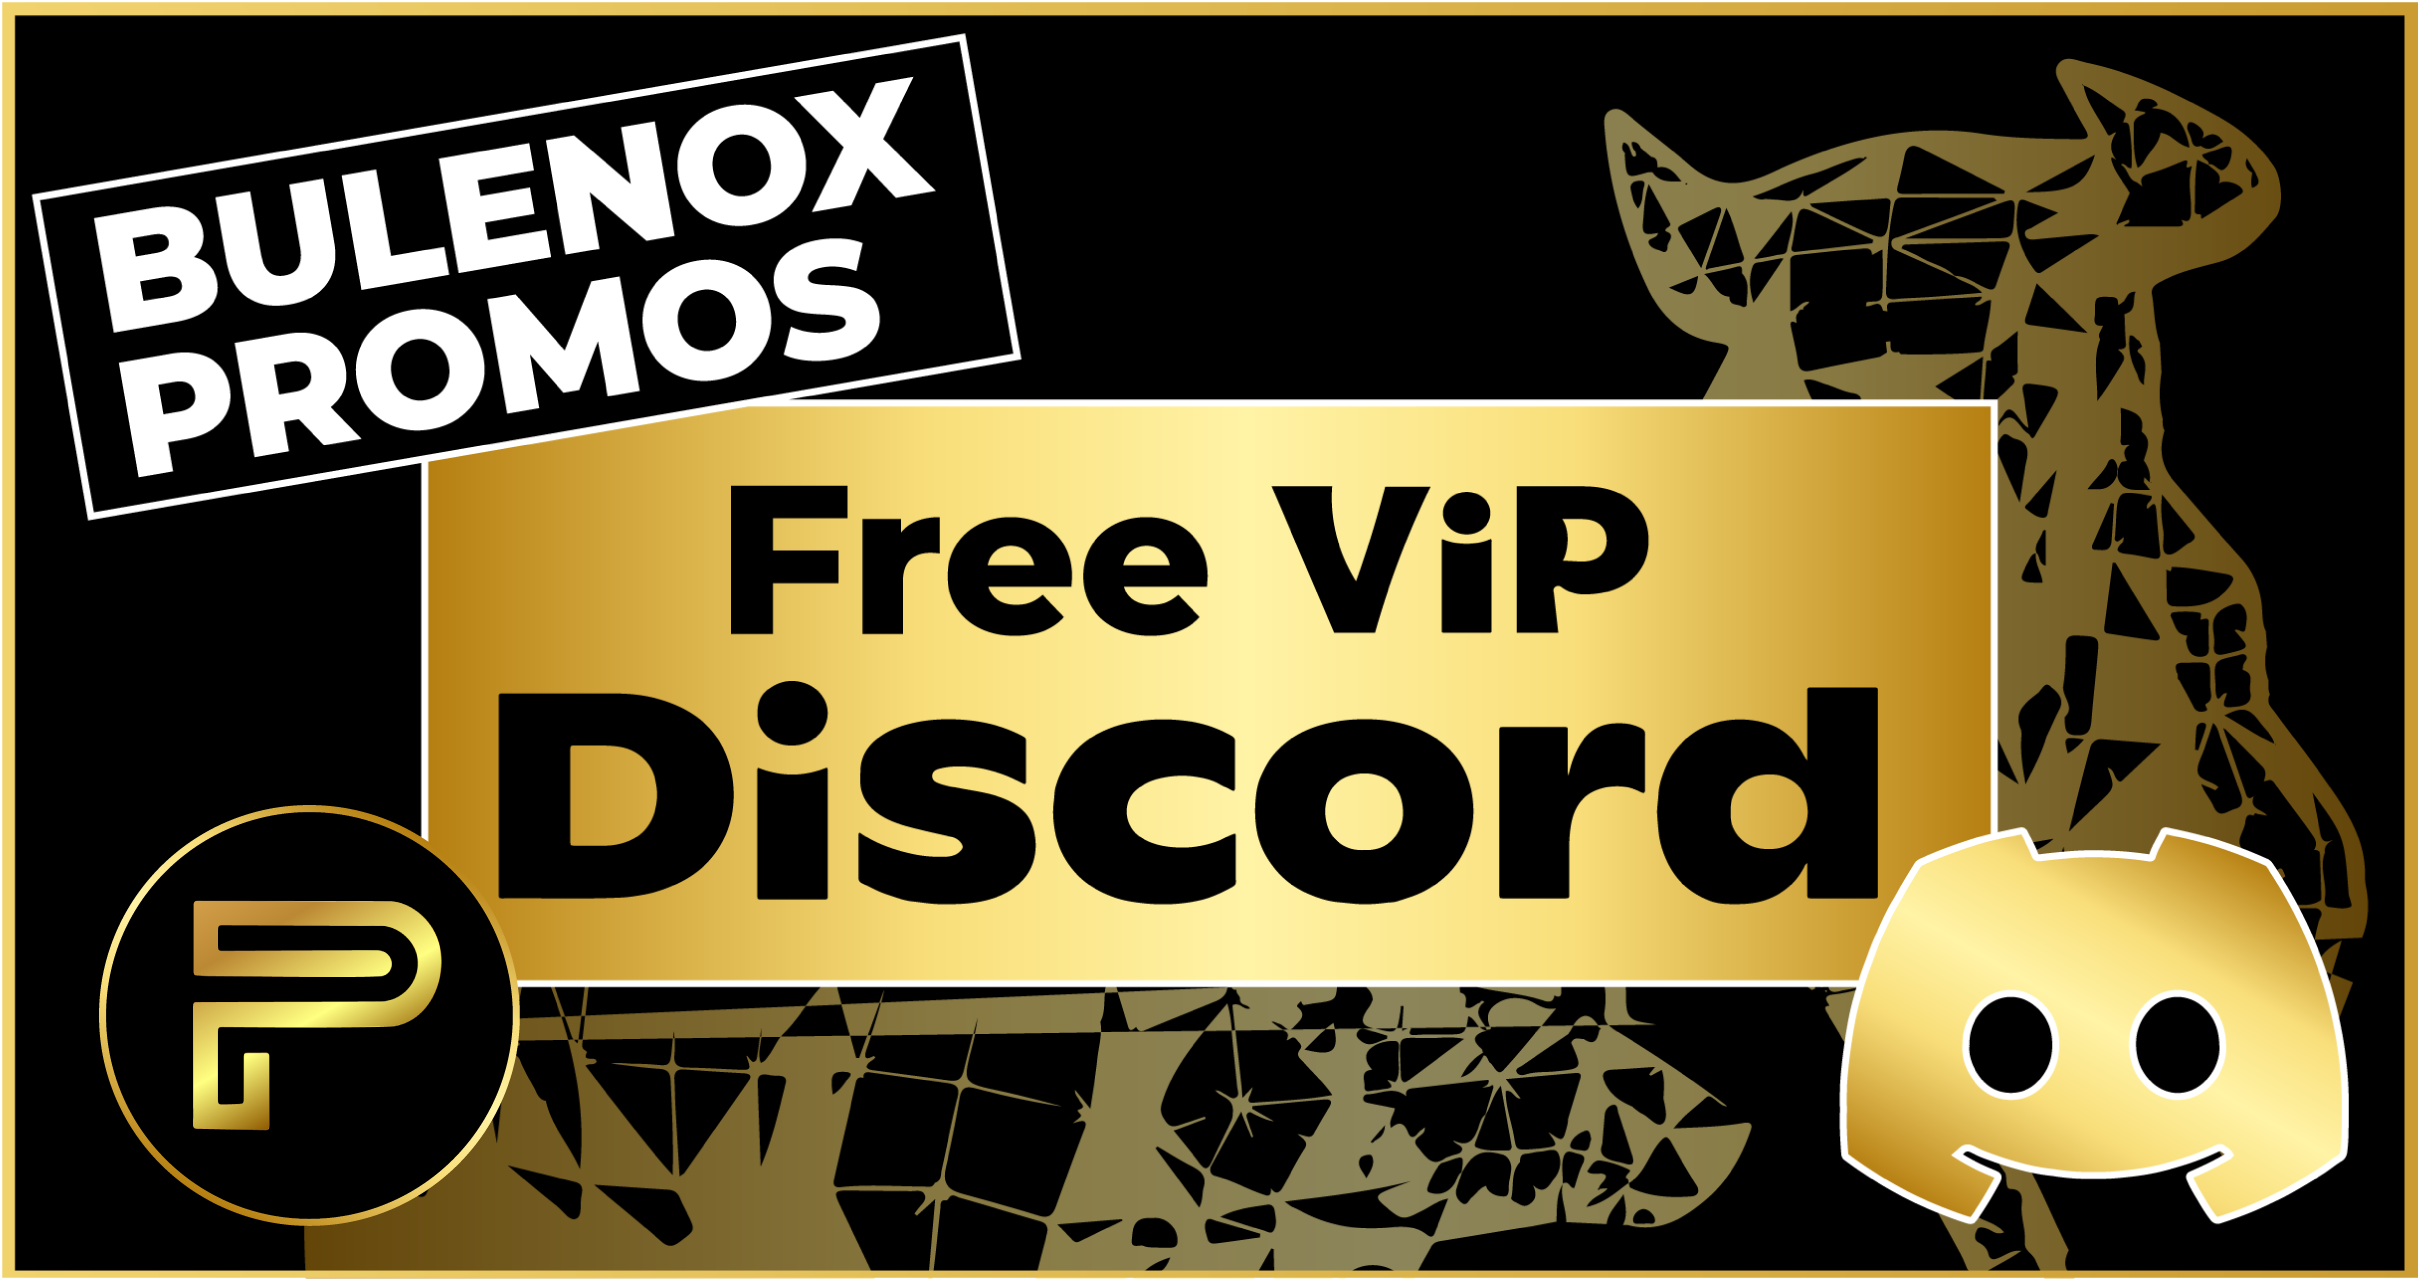 Bulenox-Promos-Free-VIP-Discord-by-Trading-Strategy-Fr